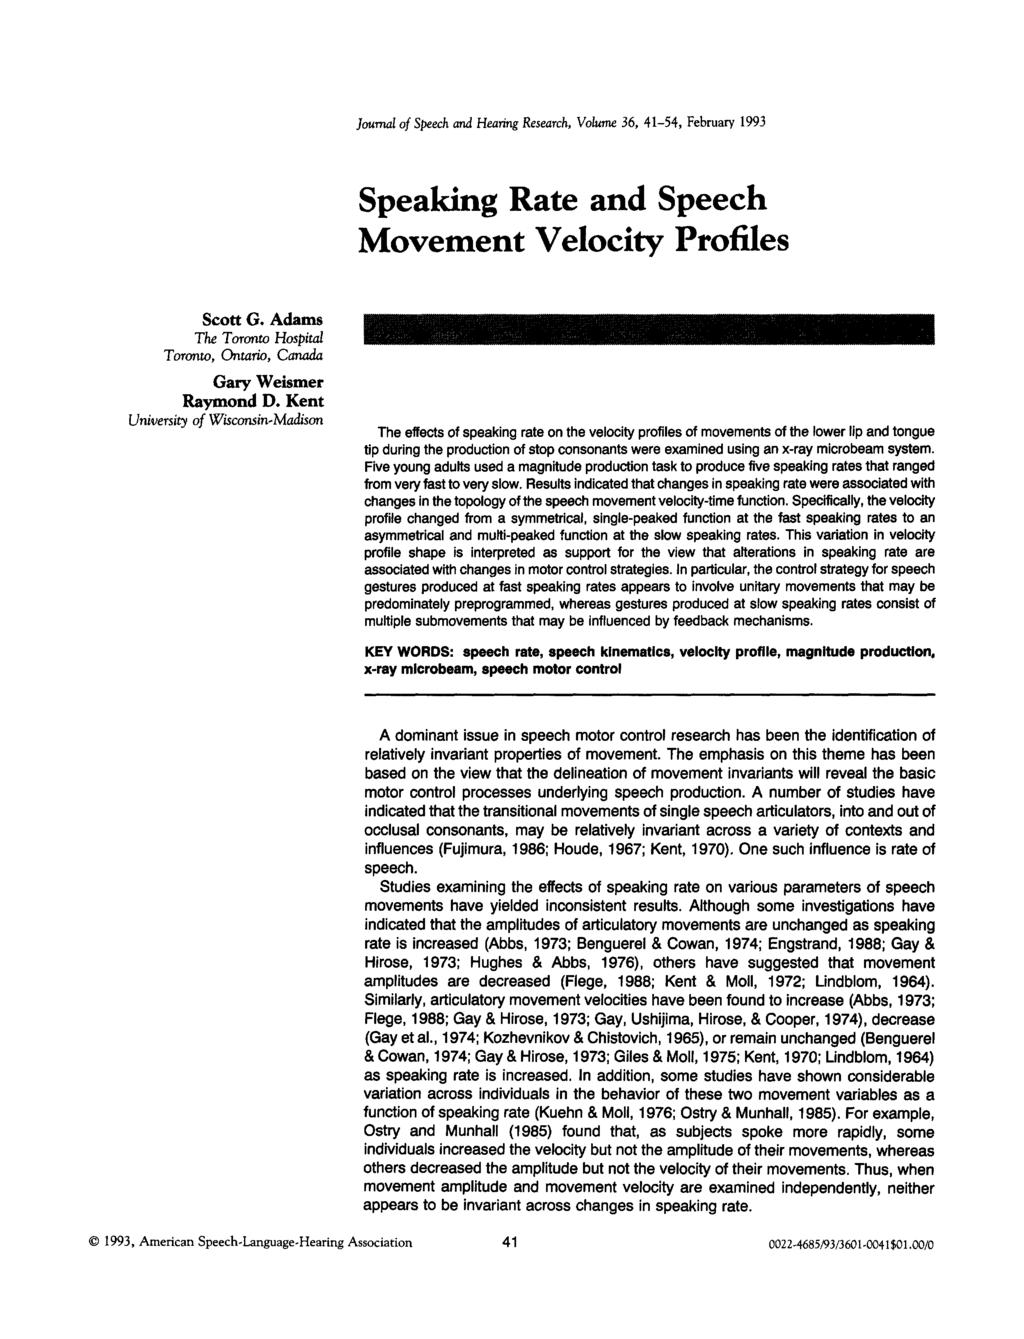 Journal of Speech and Hearing Research, Volume 36, 41-54, February 1993 Speaking Rate and Speech Movement Velocity Profiles Scott G.